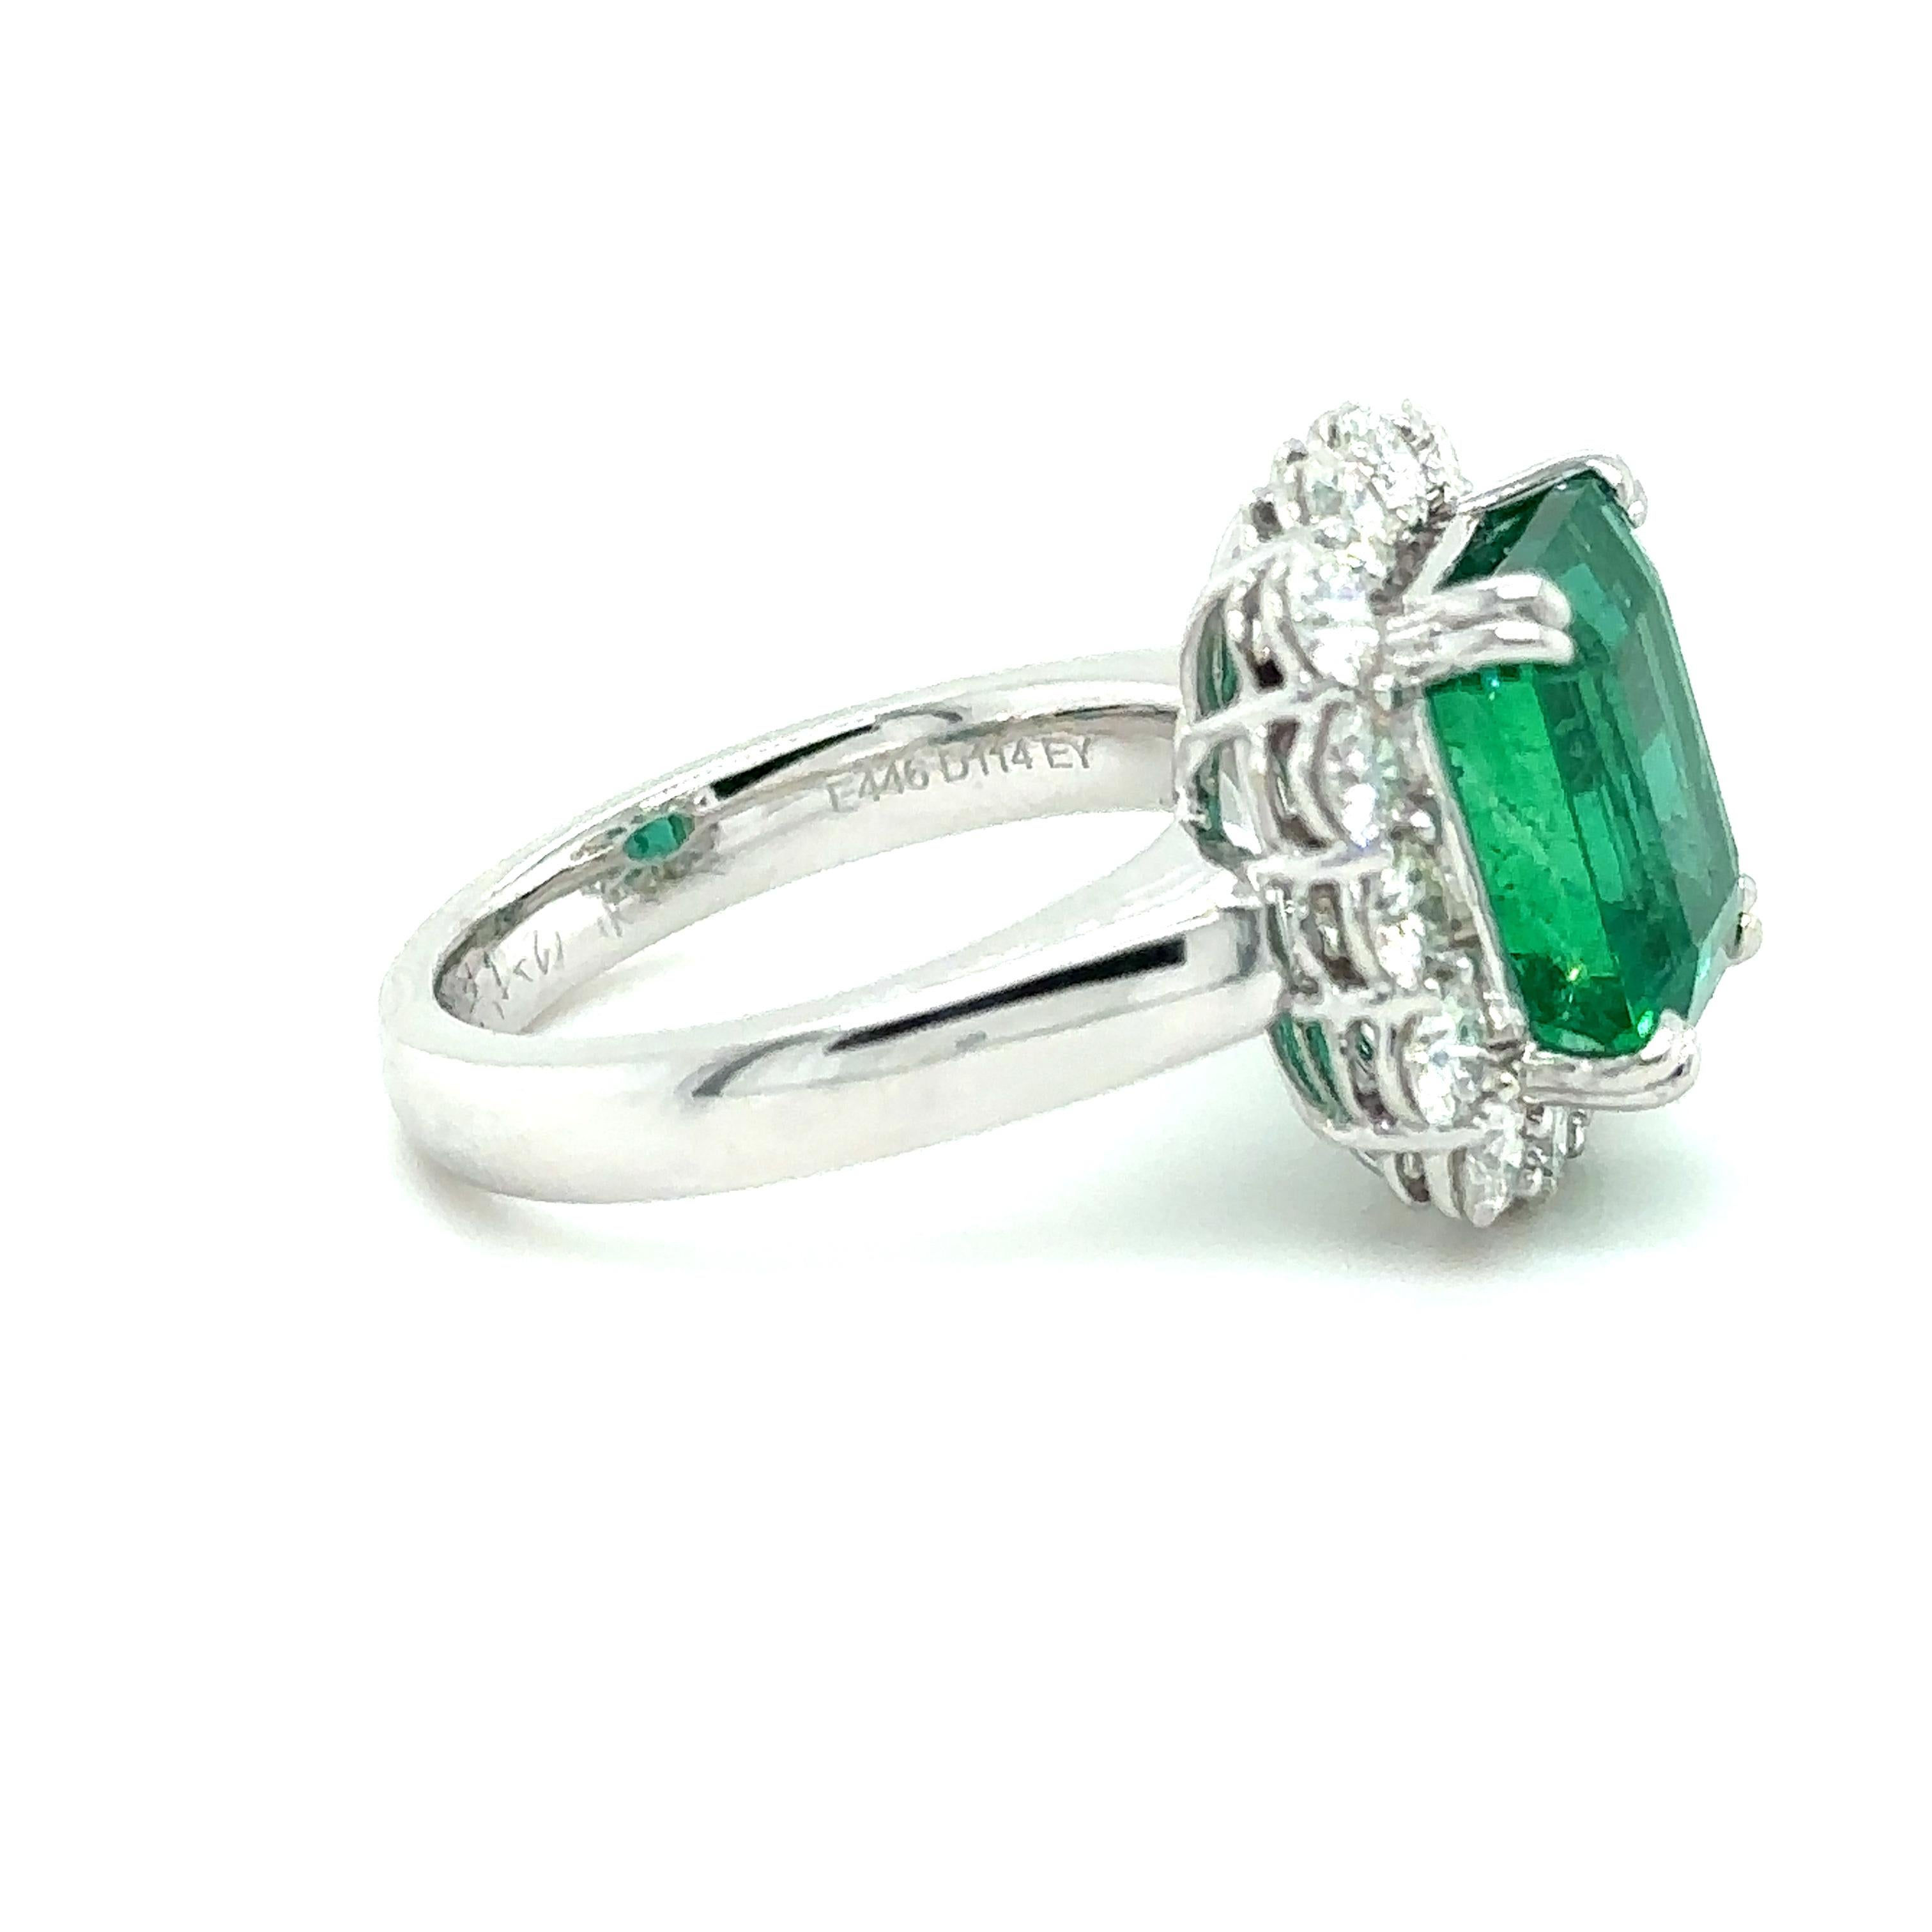 This timeless elegant ring is made from 18k white gold, featuring a stunning 4.46ct Emerald, which is the centerpiece of the design. The Emerald is graded intense to vivid green color, which is highly sought after in the world of gems and is a key